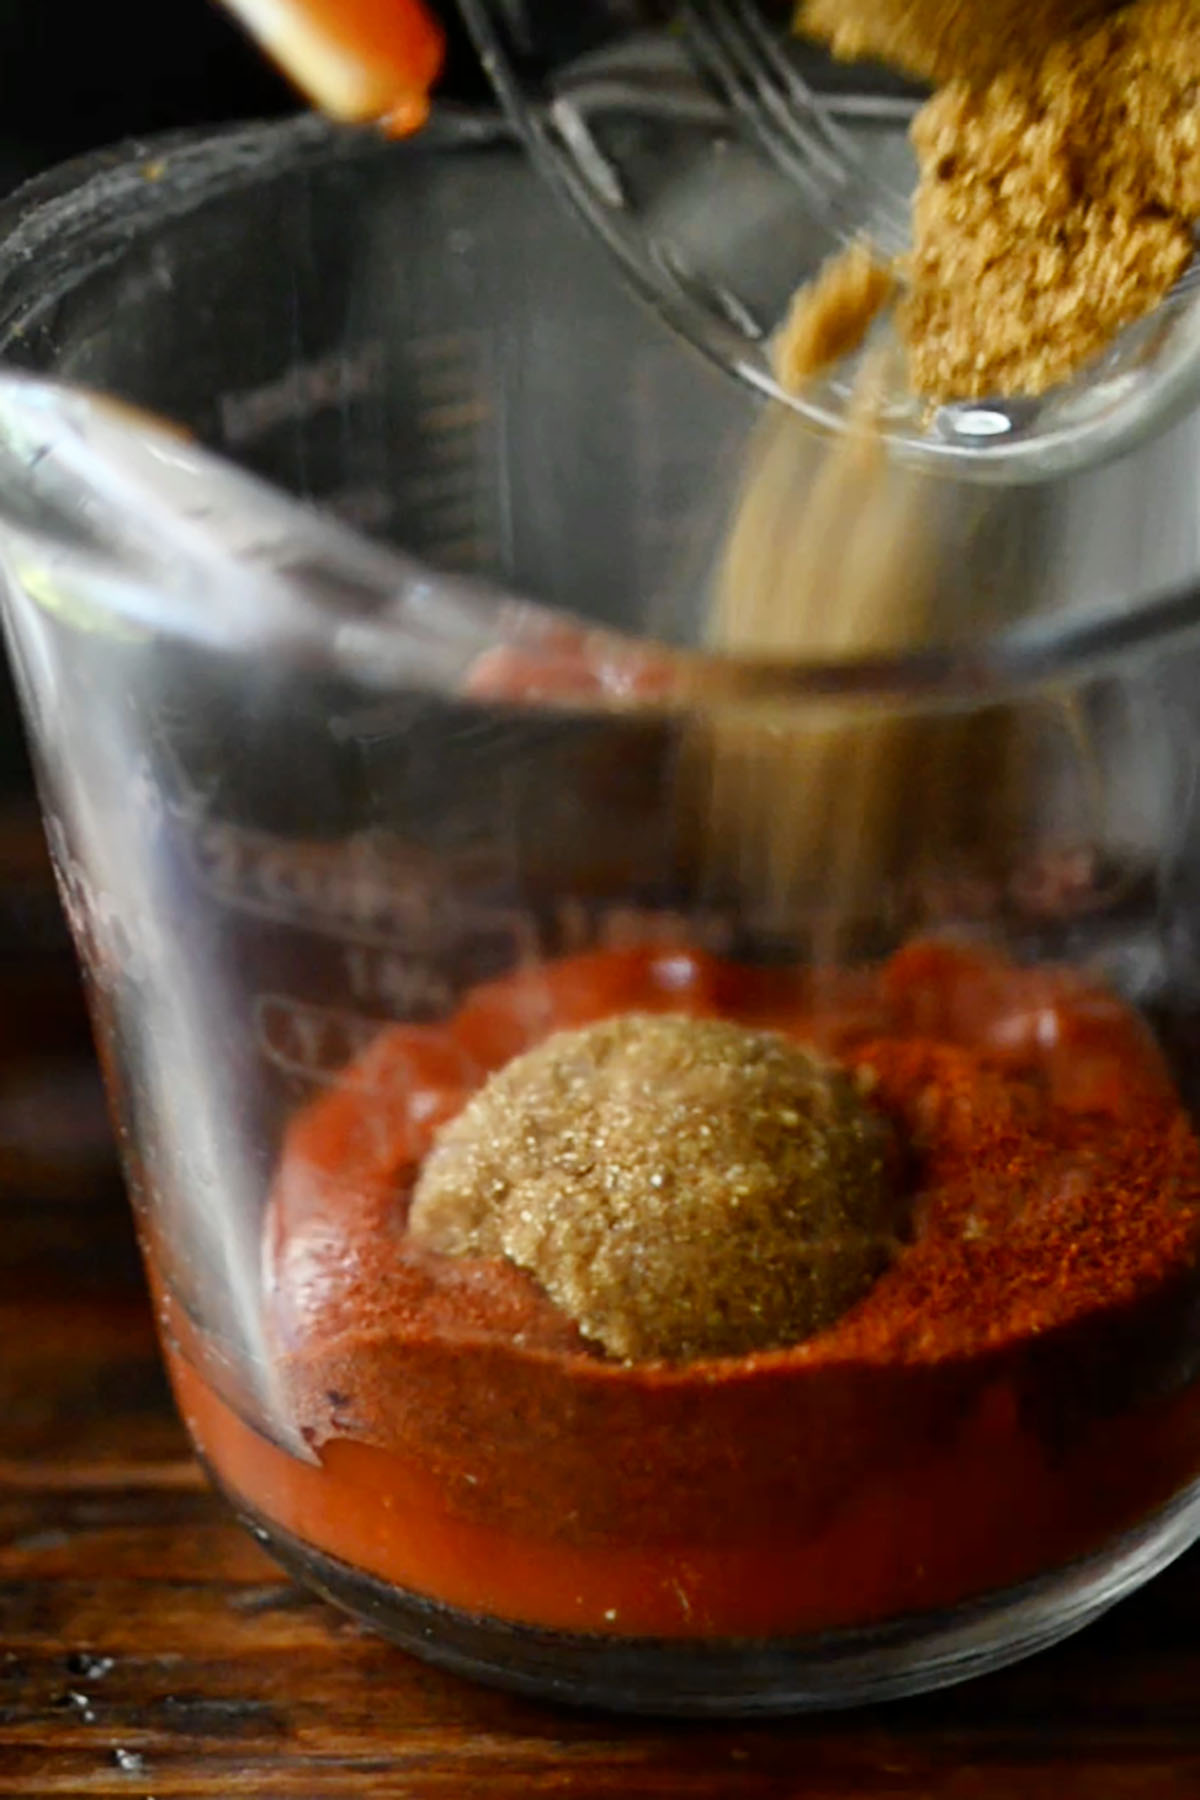 Brown sugar being added a ketchup mixture in a glass measuring cup.